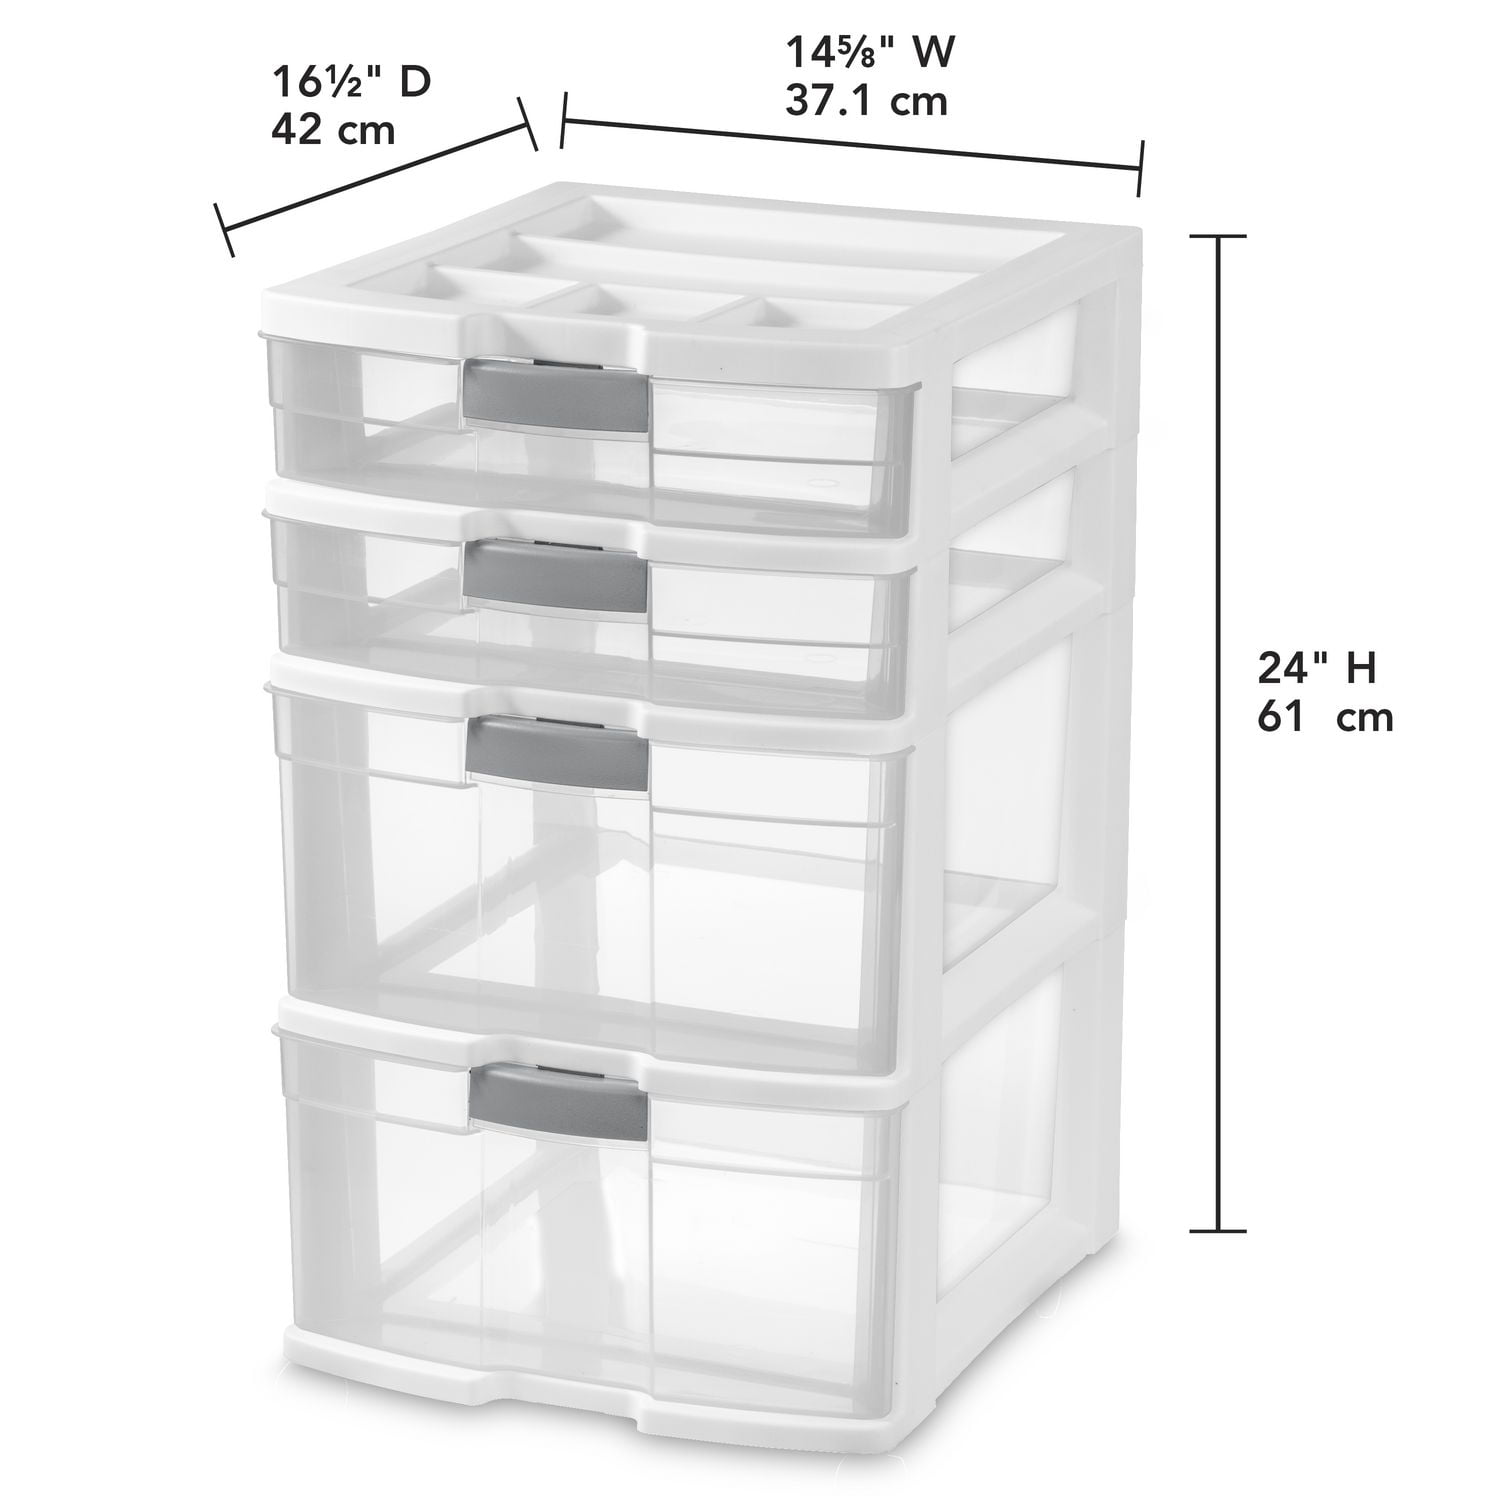 Extra Wide YY 12 Compartment Modular Drawer Organzier